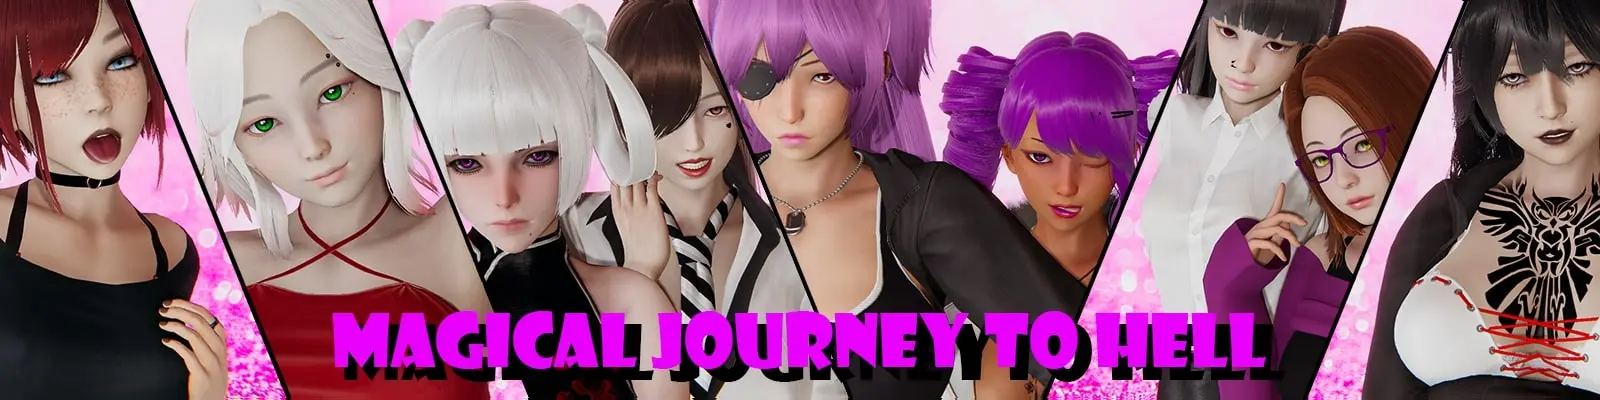 Magical Journey to Hell [v0.01b] main image